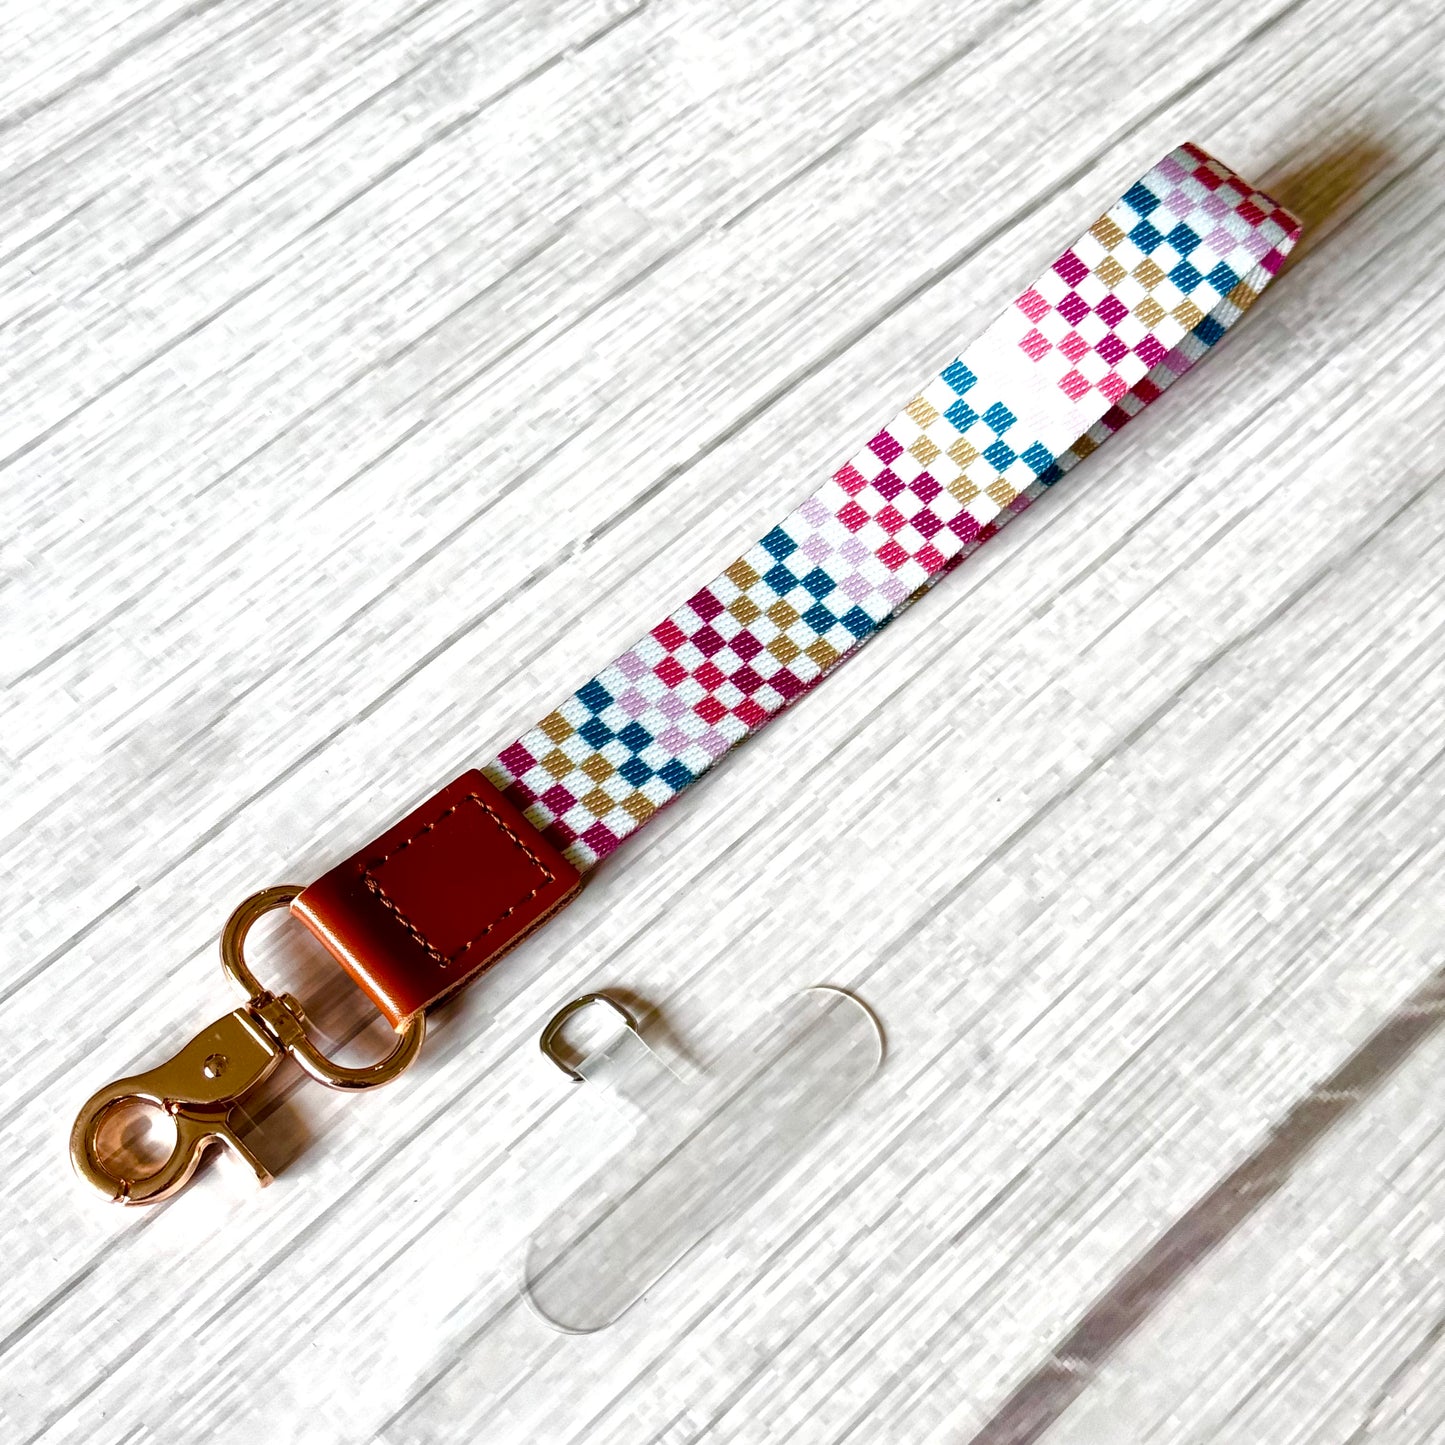 Phone Wrist Strap with Tether Tab - COLORED CHECKERS